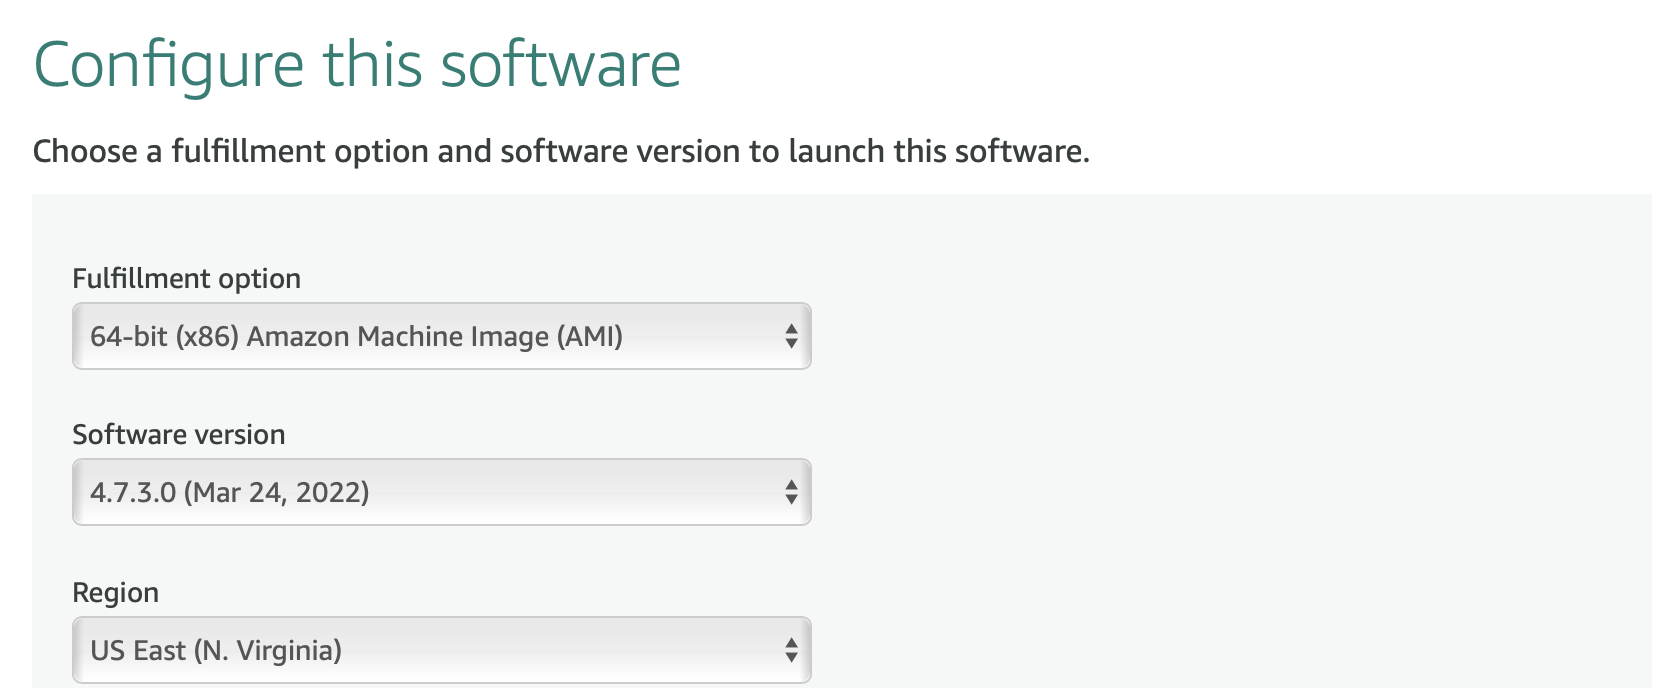 aws-_marketplace-_step1a-_configure-this-software.png